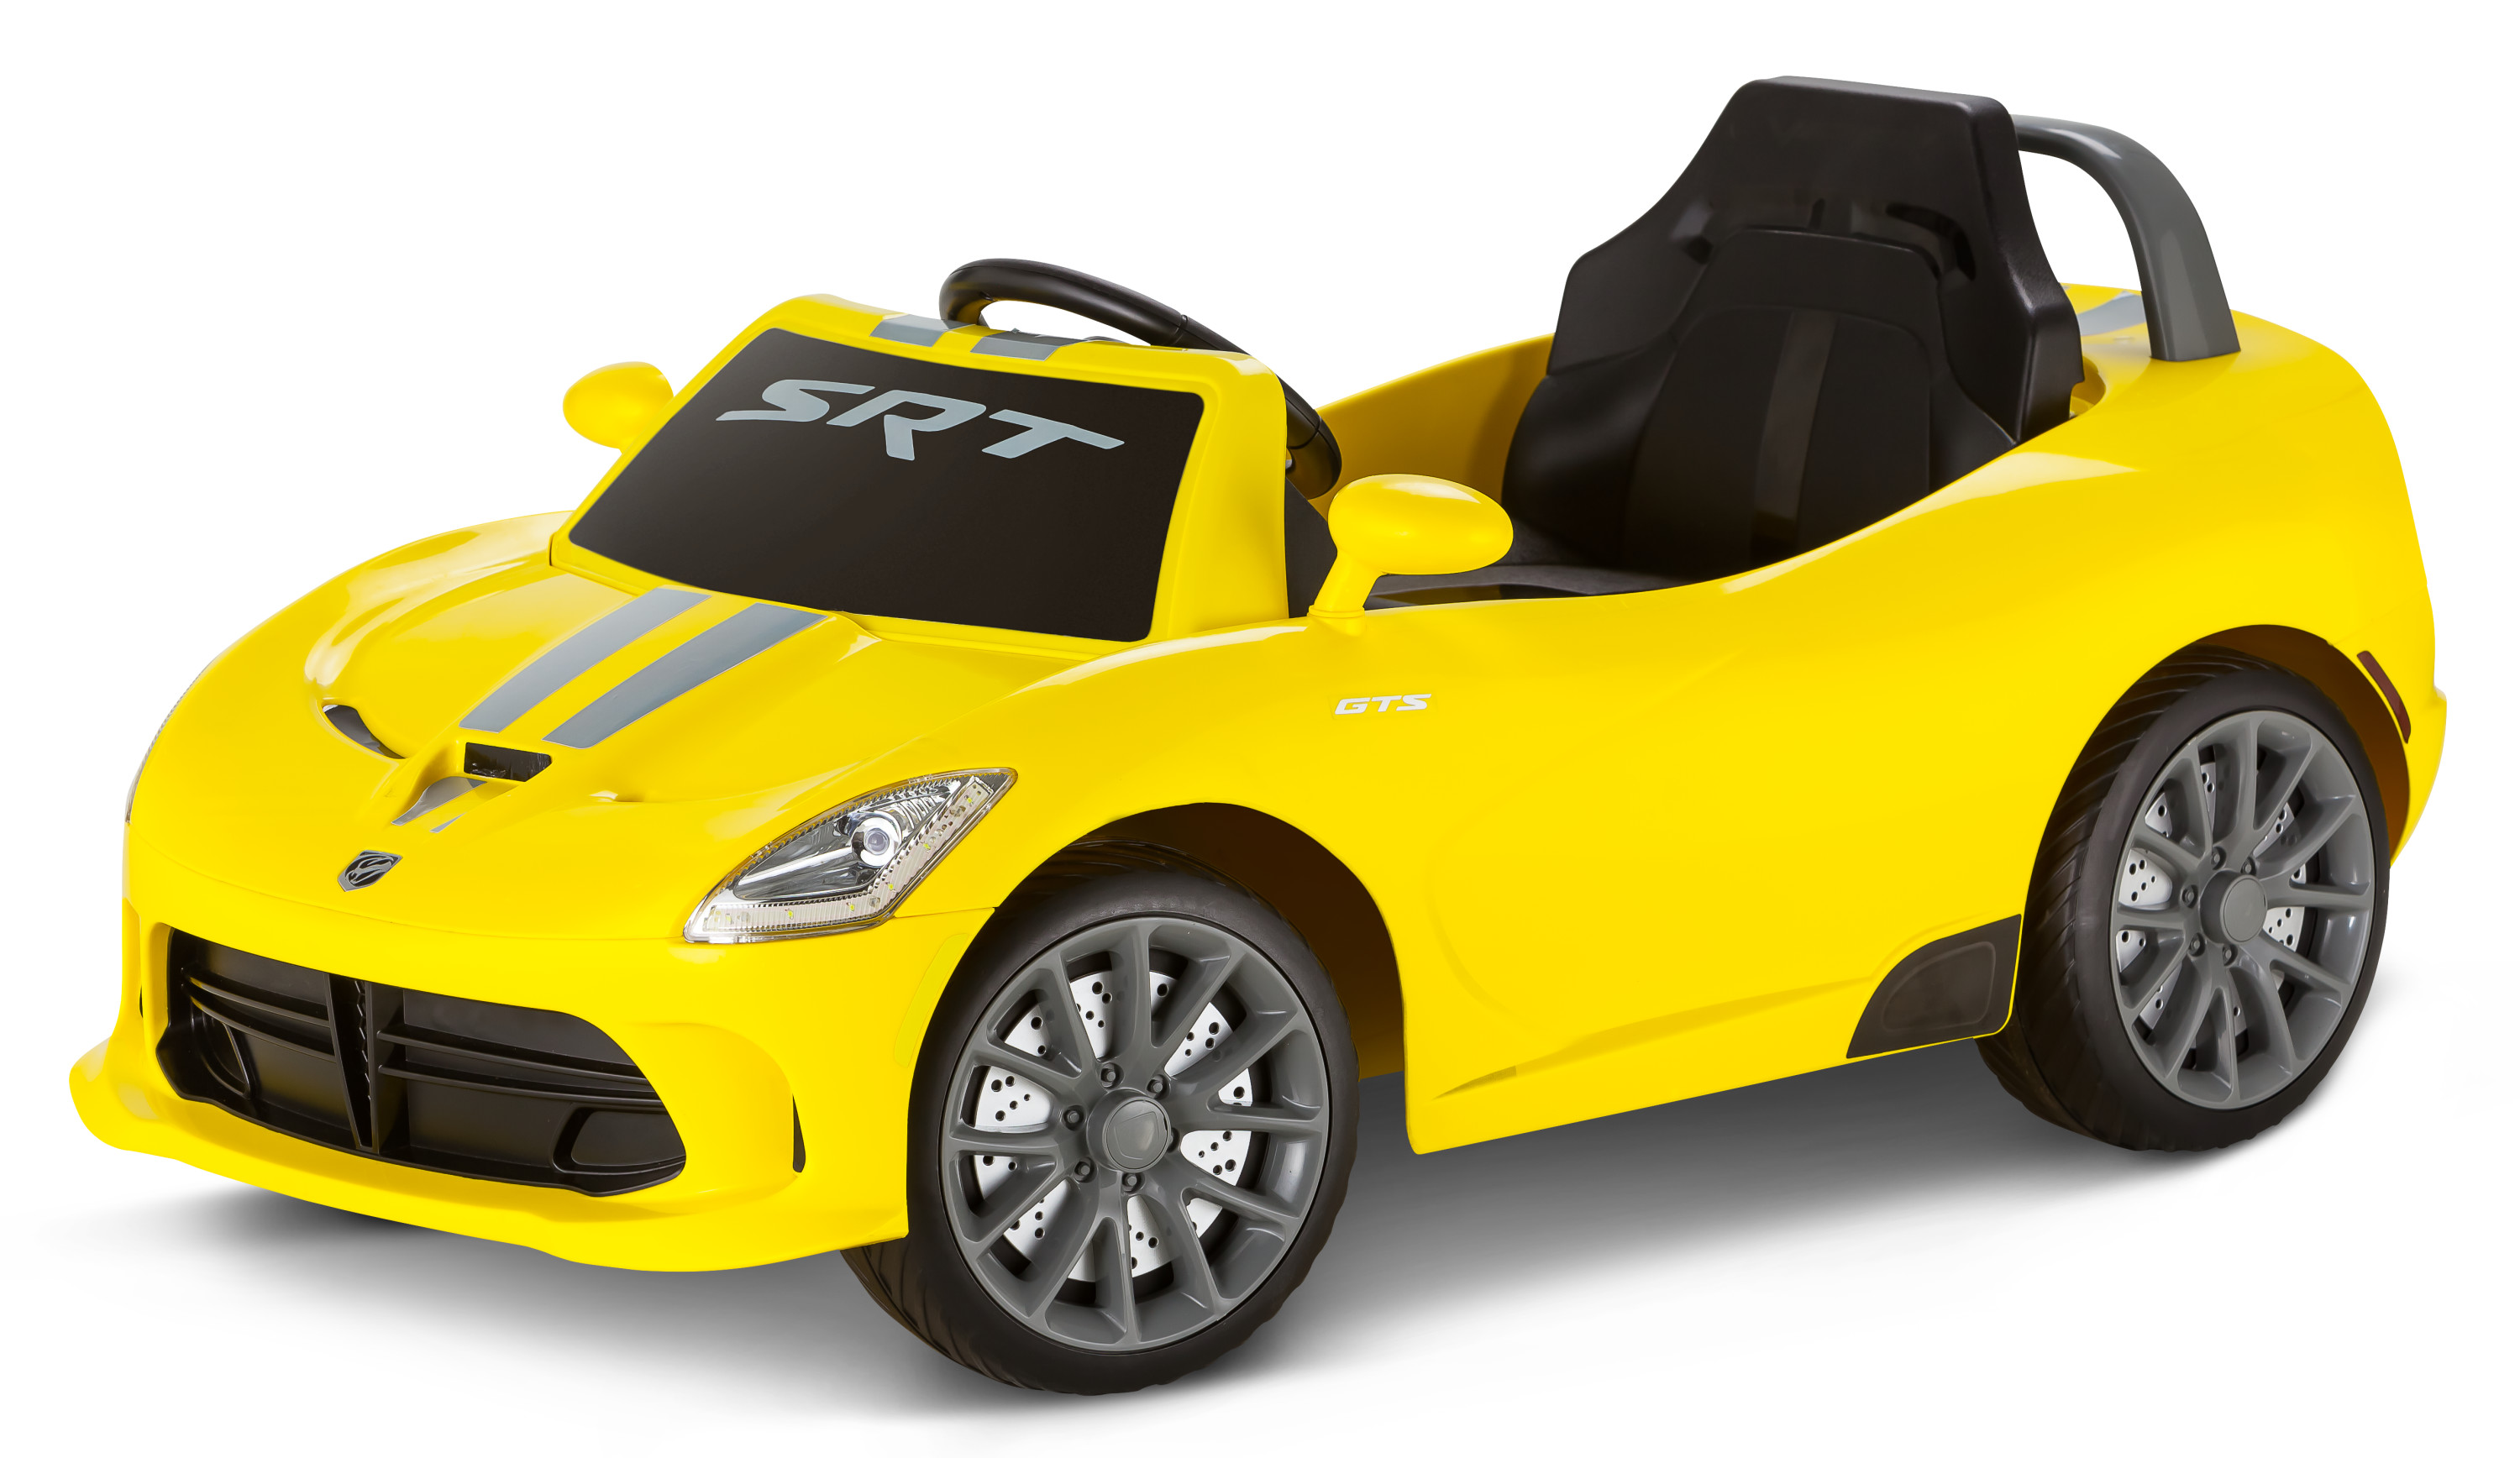 Dodge Viper SRT, 6-Volt Ride-On Toy by Kid Trax, single passenger, yellow - image 1 of 4